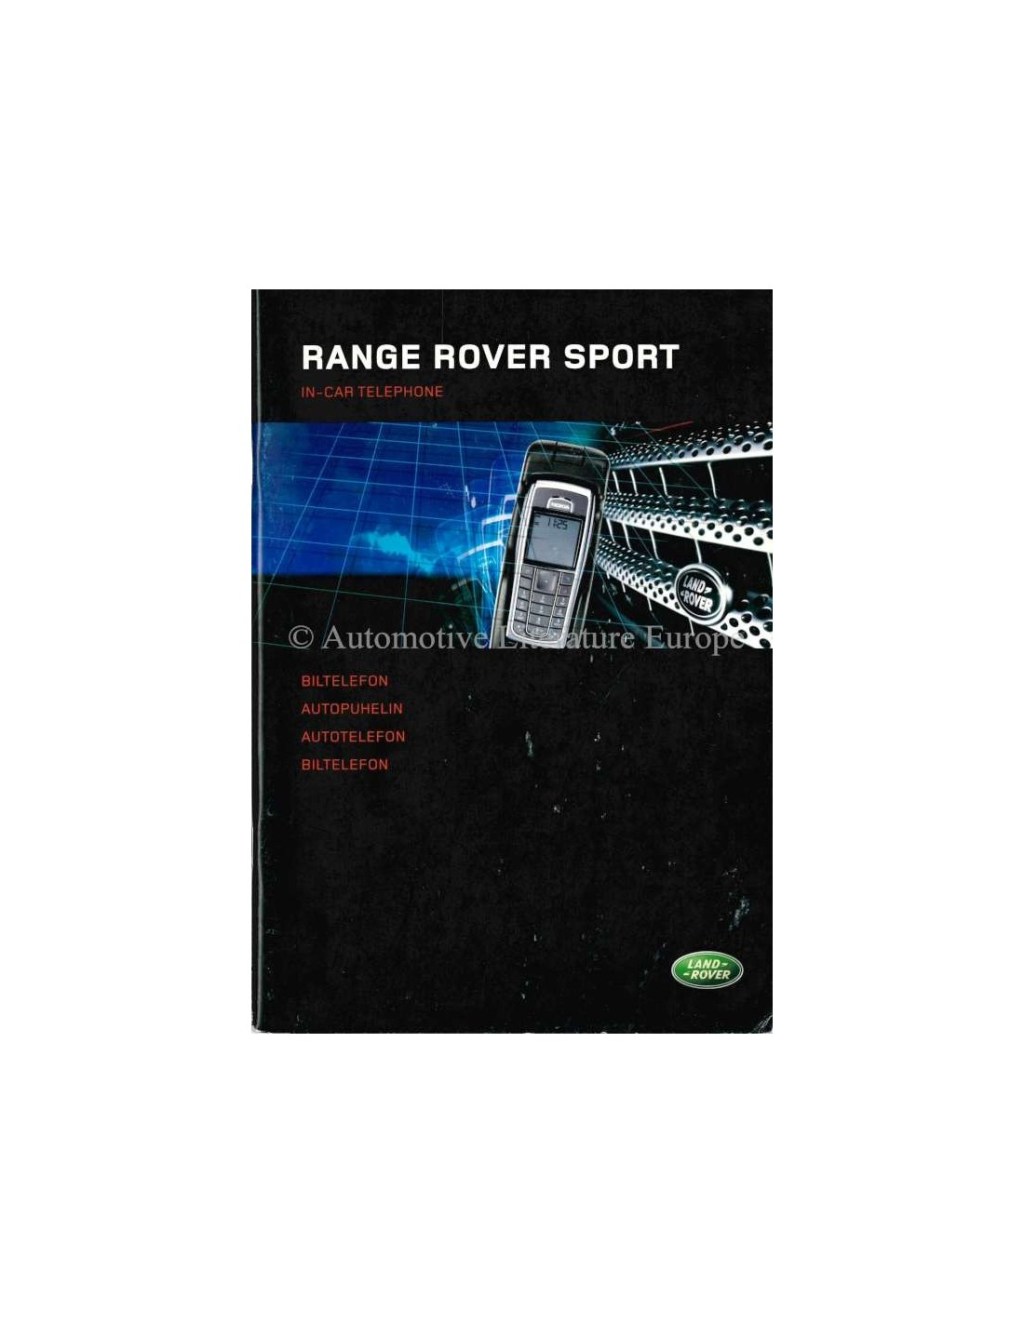 Picture of: RANGE ROVER SPORT IN-CAR TELEPHONE OWNERS MANUAL GERMAN